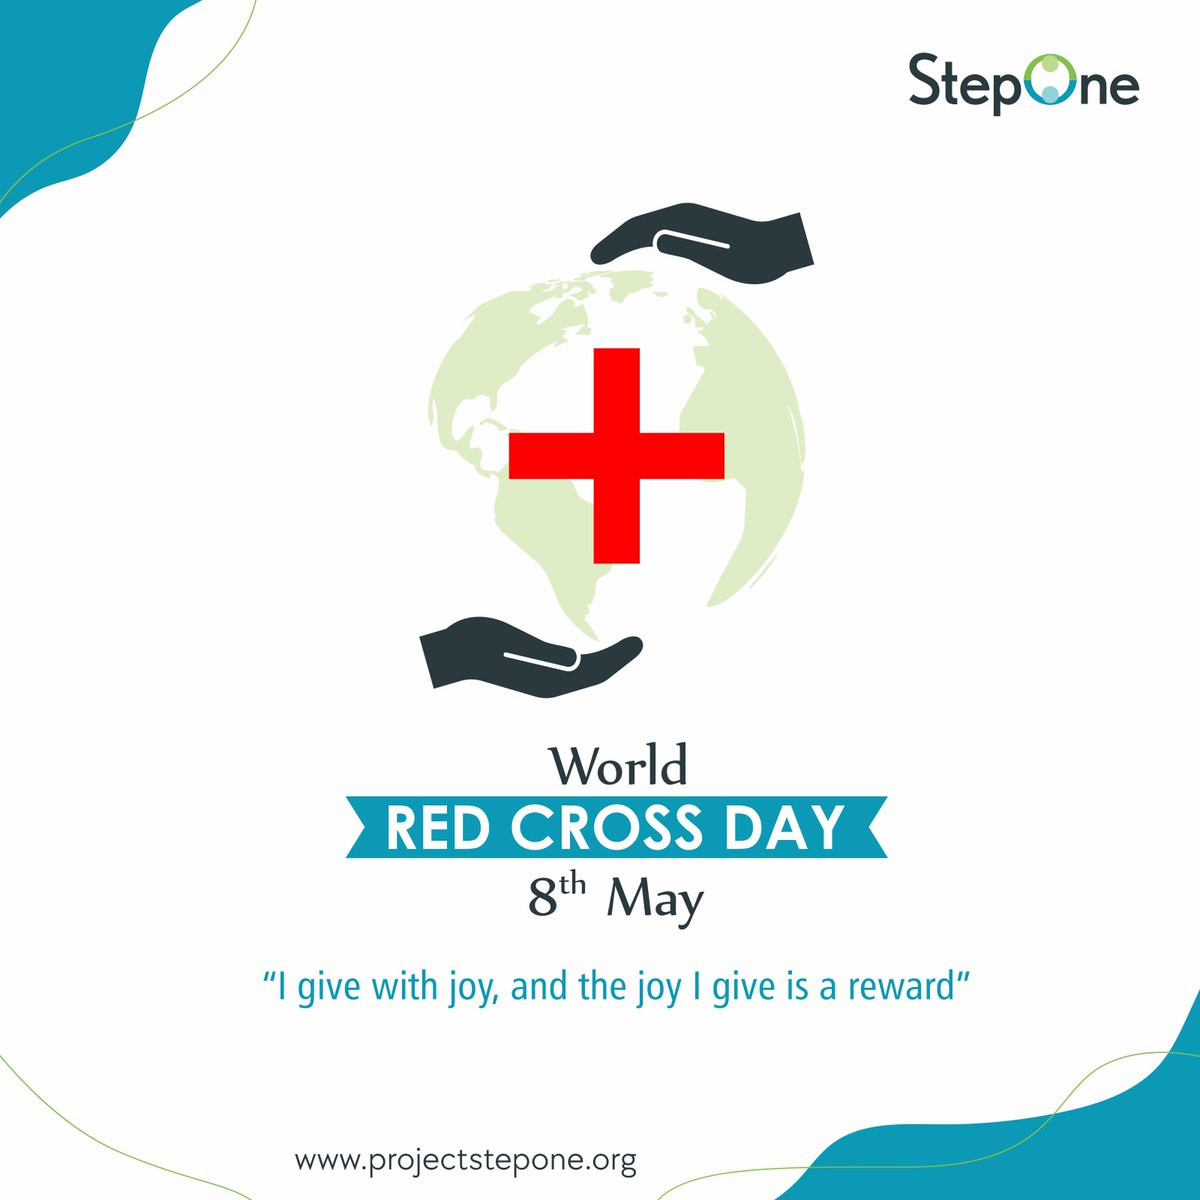 𝐖𝐨𝐫𝐥𝐝 𝐑𝐞𝐝 𝐂𝐫𝐨𝐬𝐬 𝐃𝐚𝐲! 

Let's continue to support the amazing work of the Red Cross organization 

#stepone #WorldRedCrossDay #redcross #Humanitarian #JoyfulGiving #GiveWithJoy #supportcharity #kindnessmatters #GlobalImpact #communityservice #SpreadLoveAndJoy